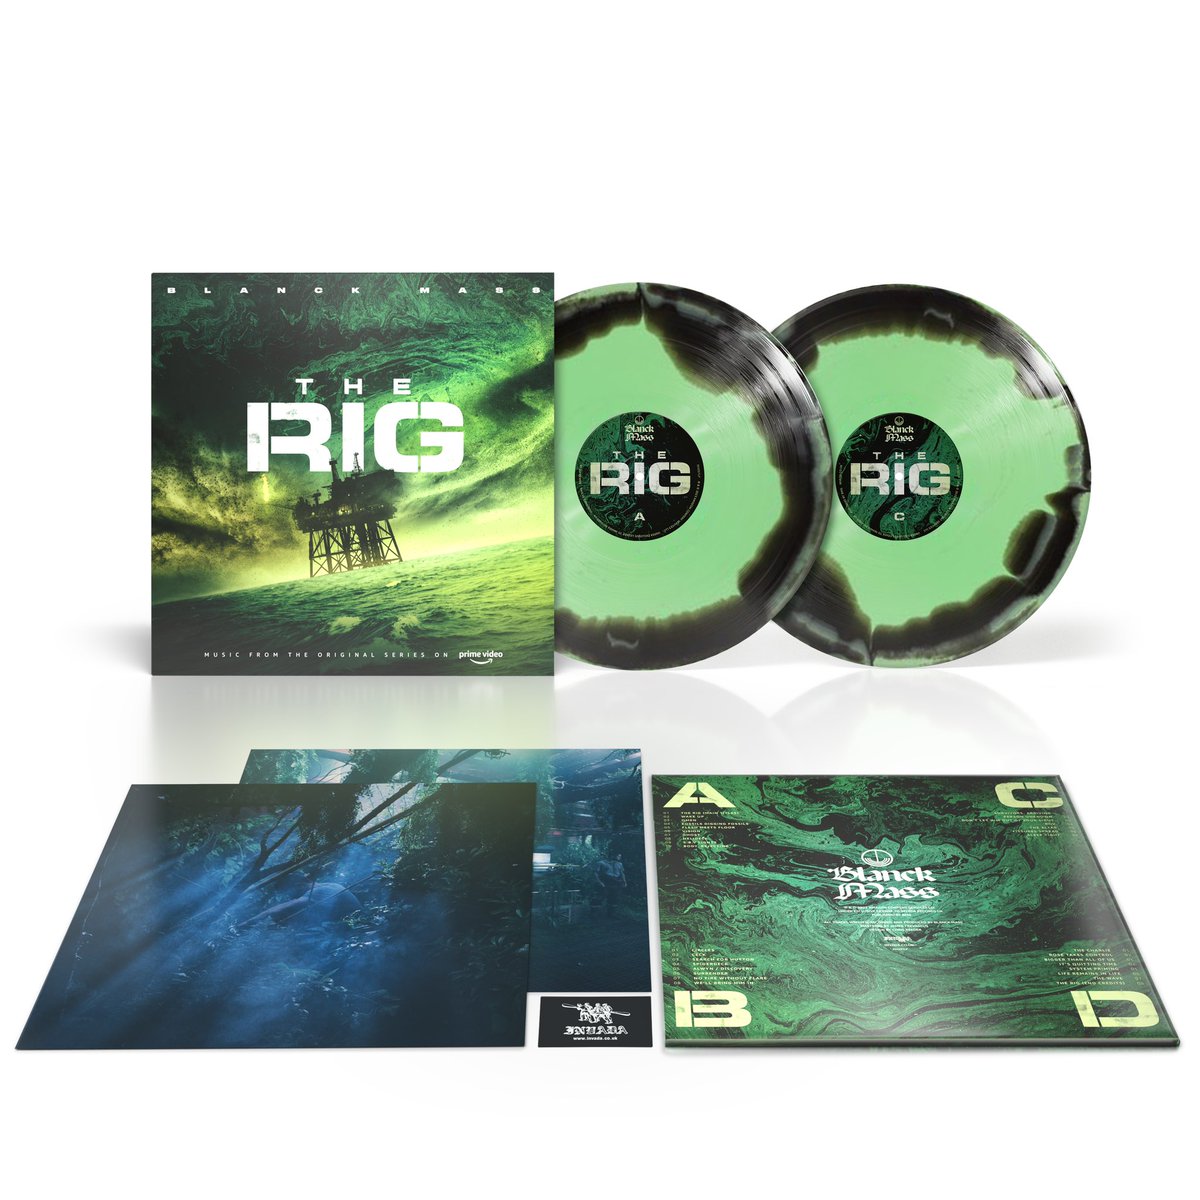 ICYMI - My score for THE RIG is now out PHYSICALLY and available from your favourite record store 🙏 Grab yourself a copy HERE - lnk.to/uPku0i54 Released via the ever amazing @invadauk